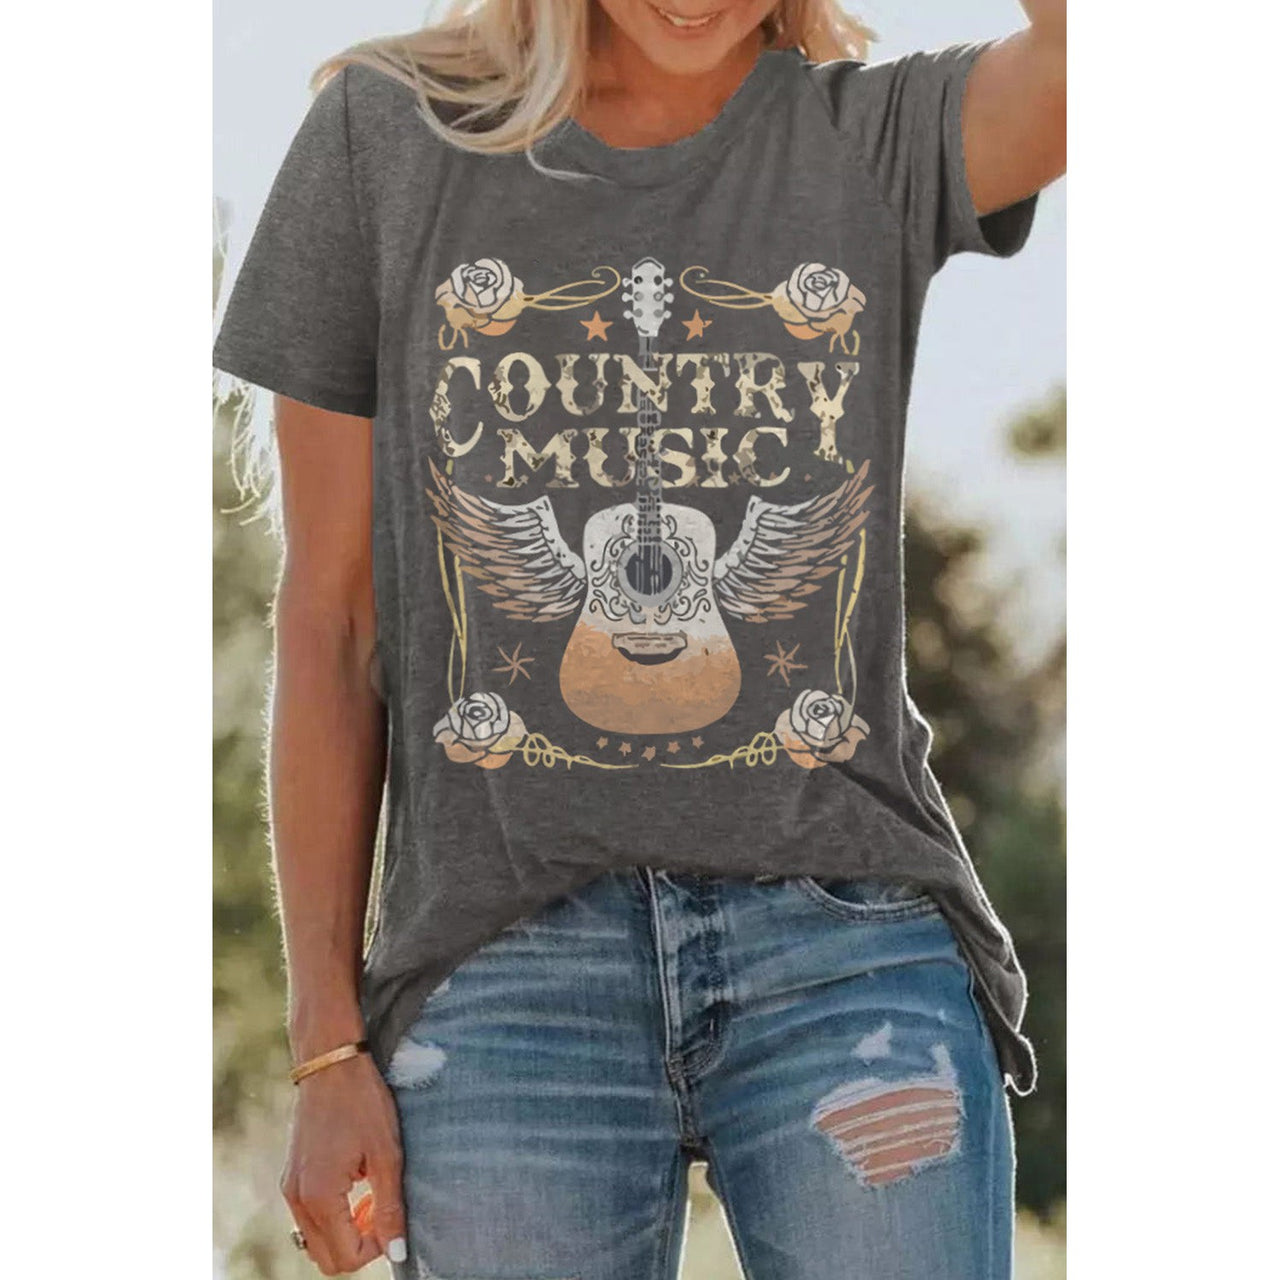 Dear Lover Women's Country Music Guitar Graphic Print Crew Neck T-Shirt - Grey